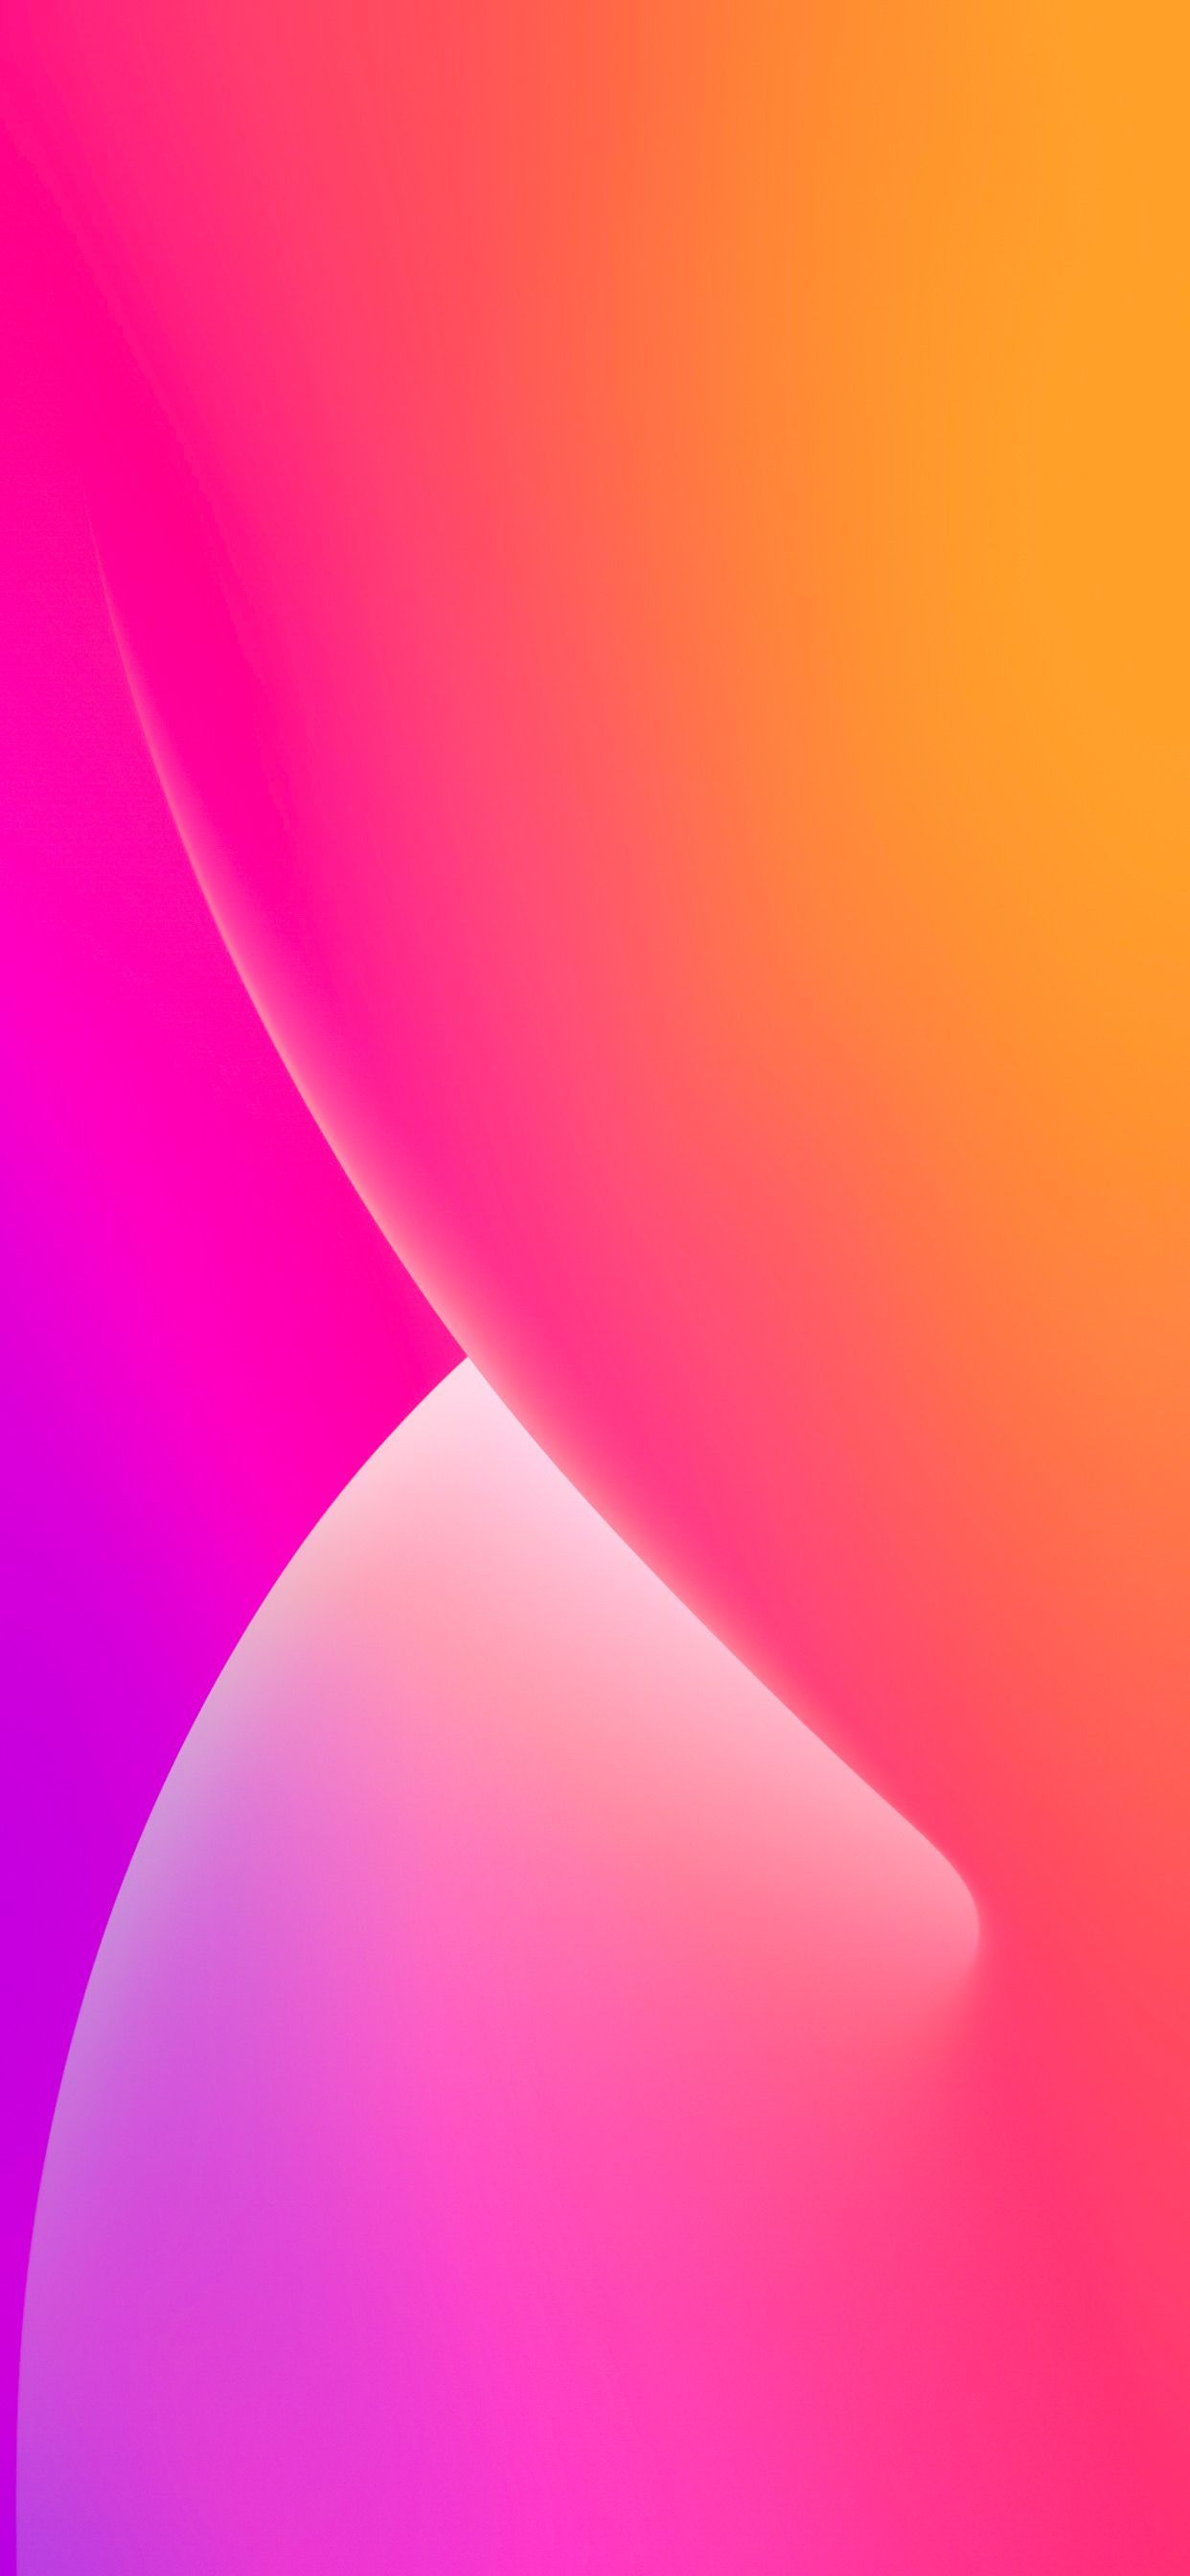 iOS 14 Wallpapers in 2020